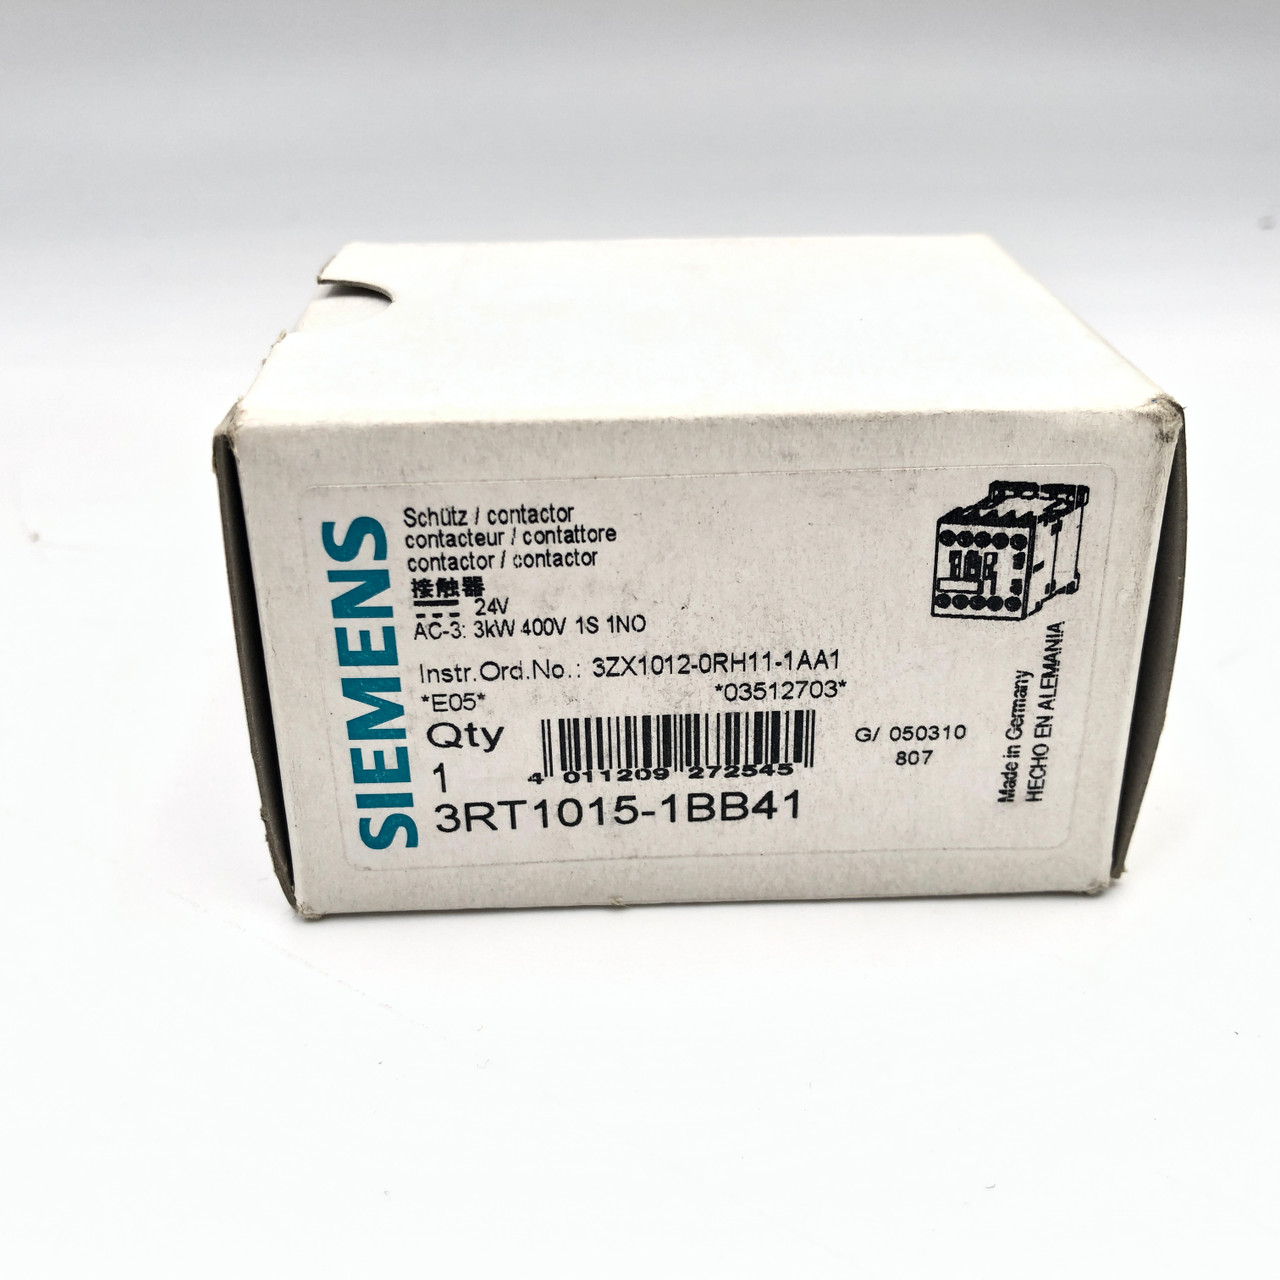 LOT OF 2 - SIEMENS 3RT1015-1BB41 3 POLE 3 kW NON-REVERSING CONTACTOR  - NEW